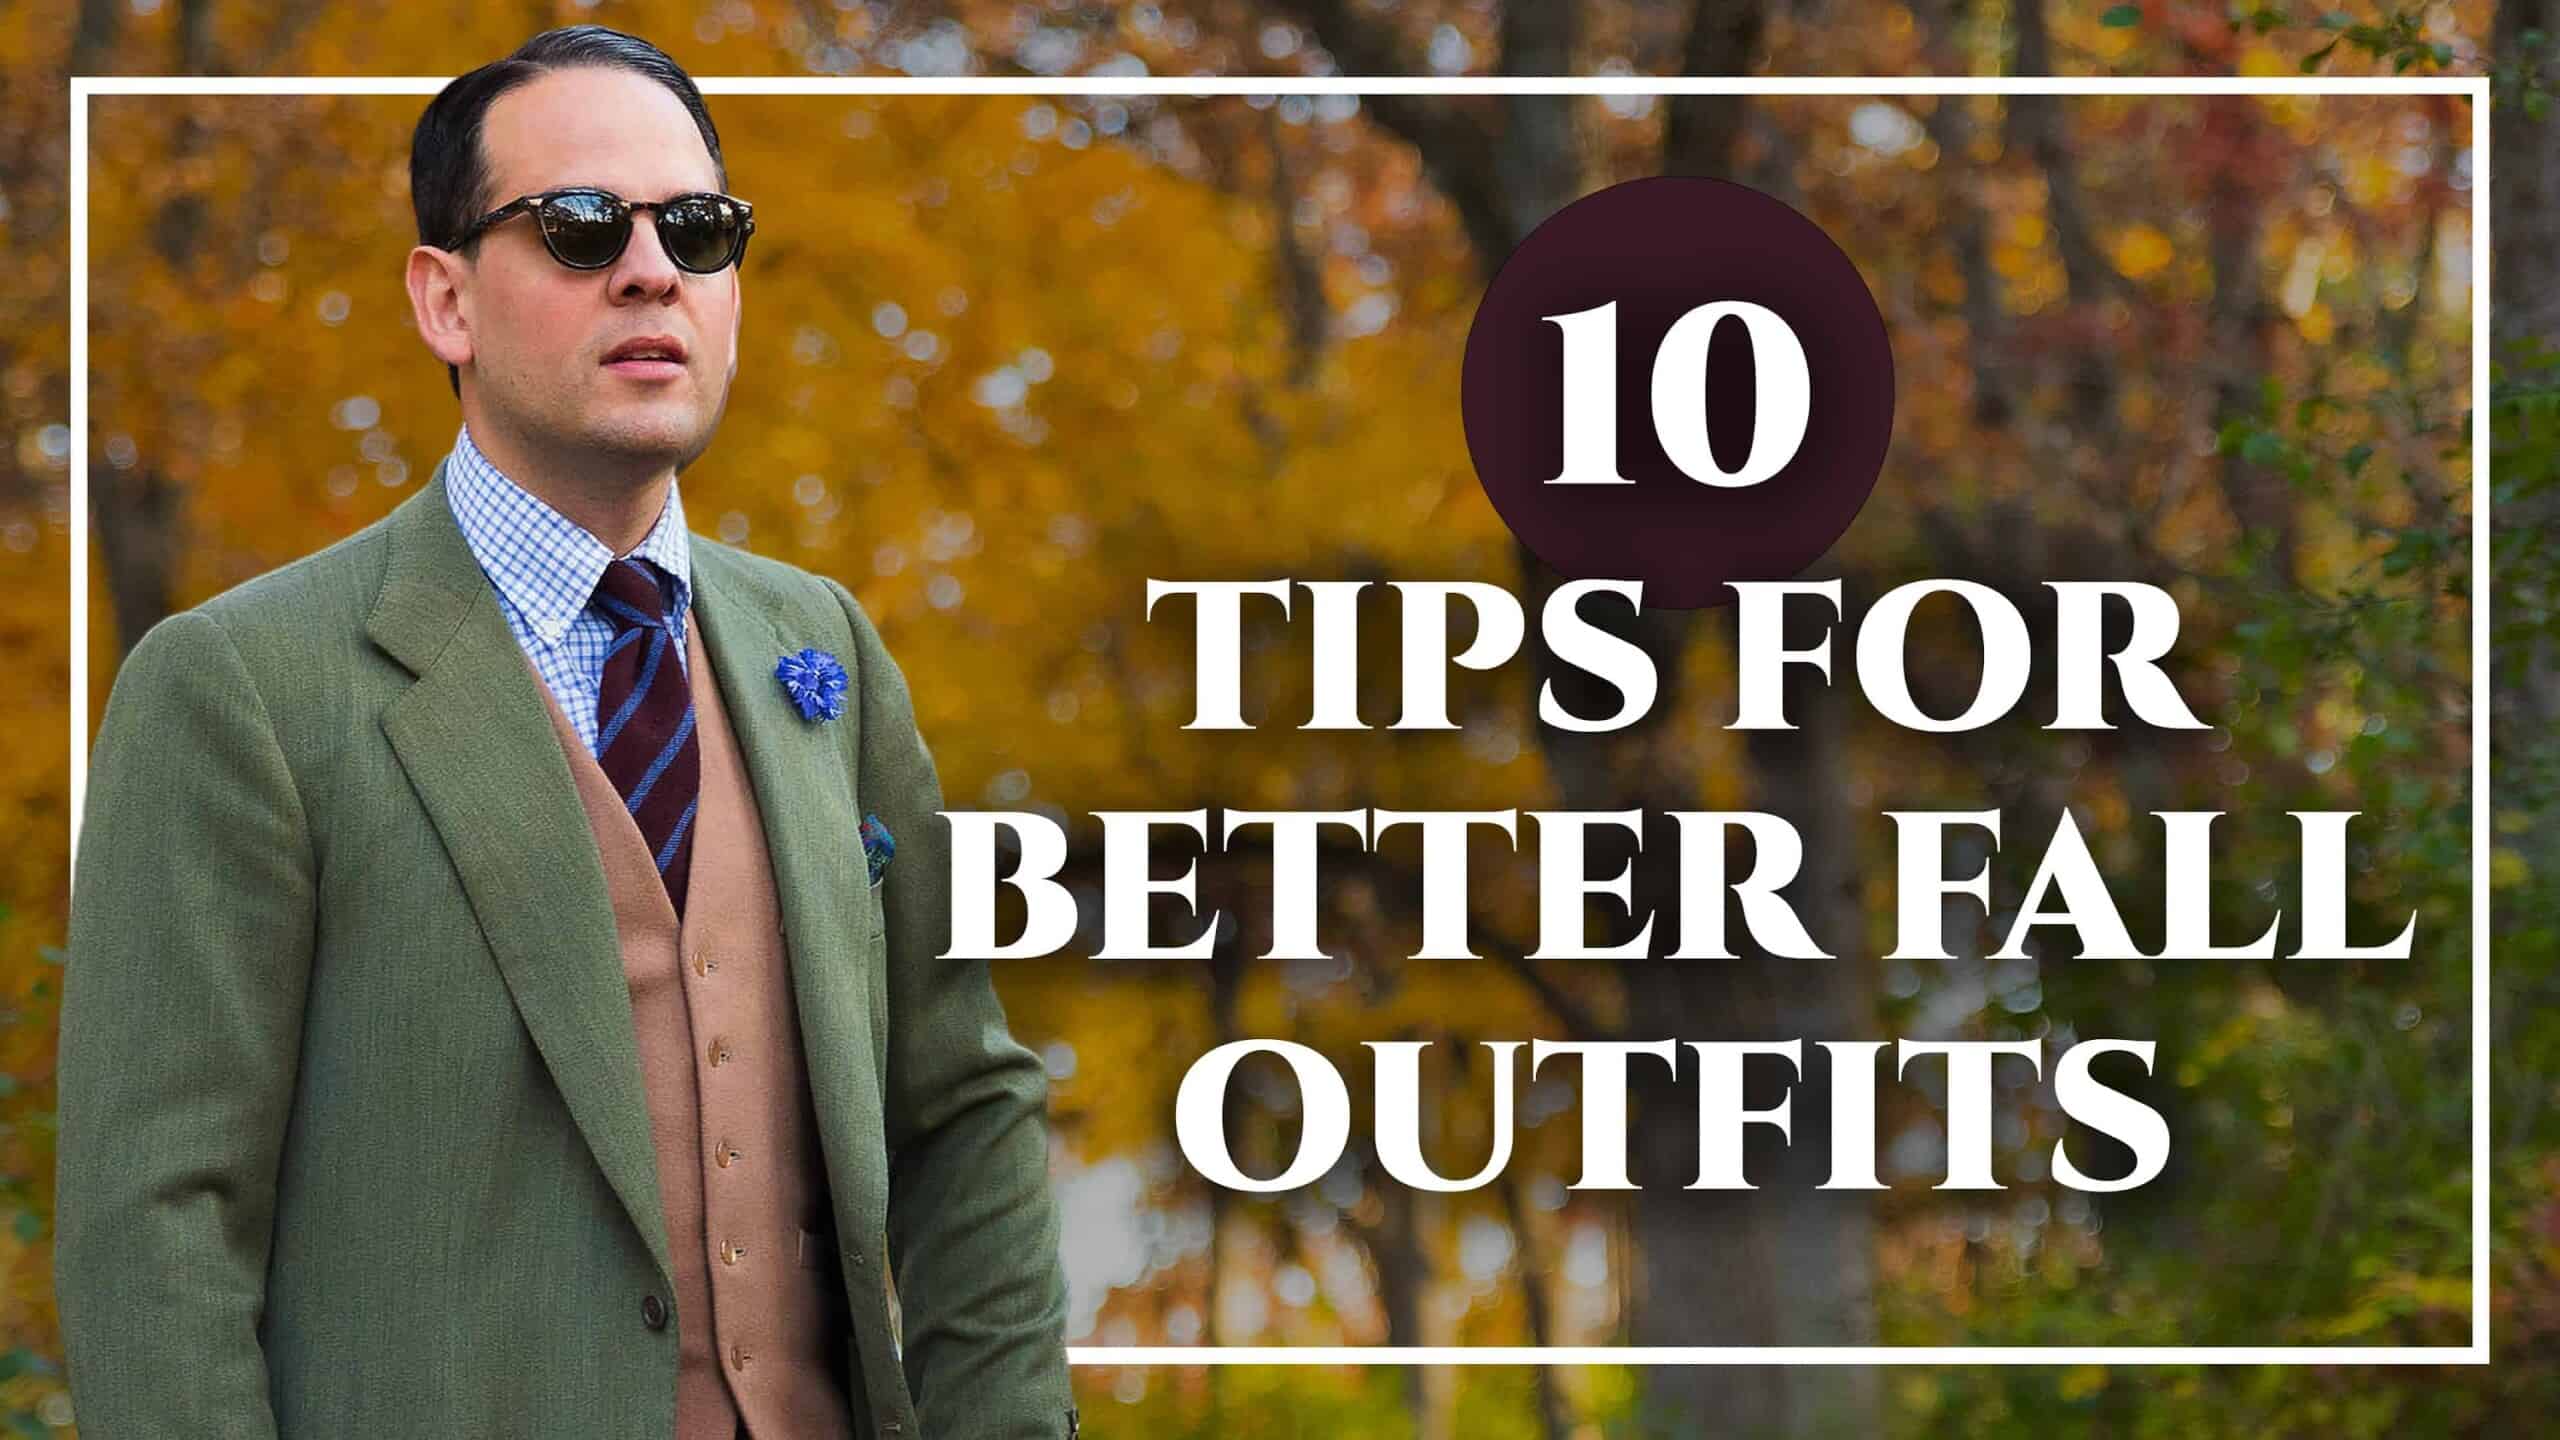 10 tips for better fall outfits 3840x2160 scaled